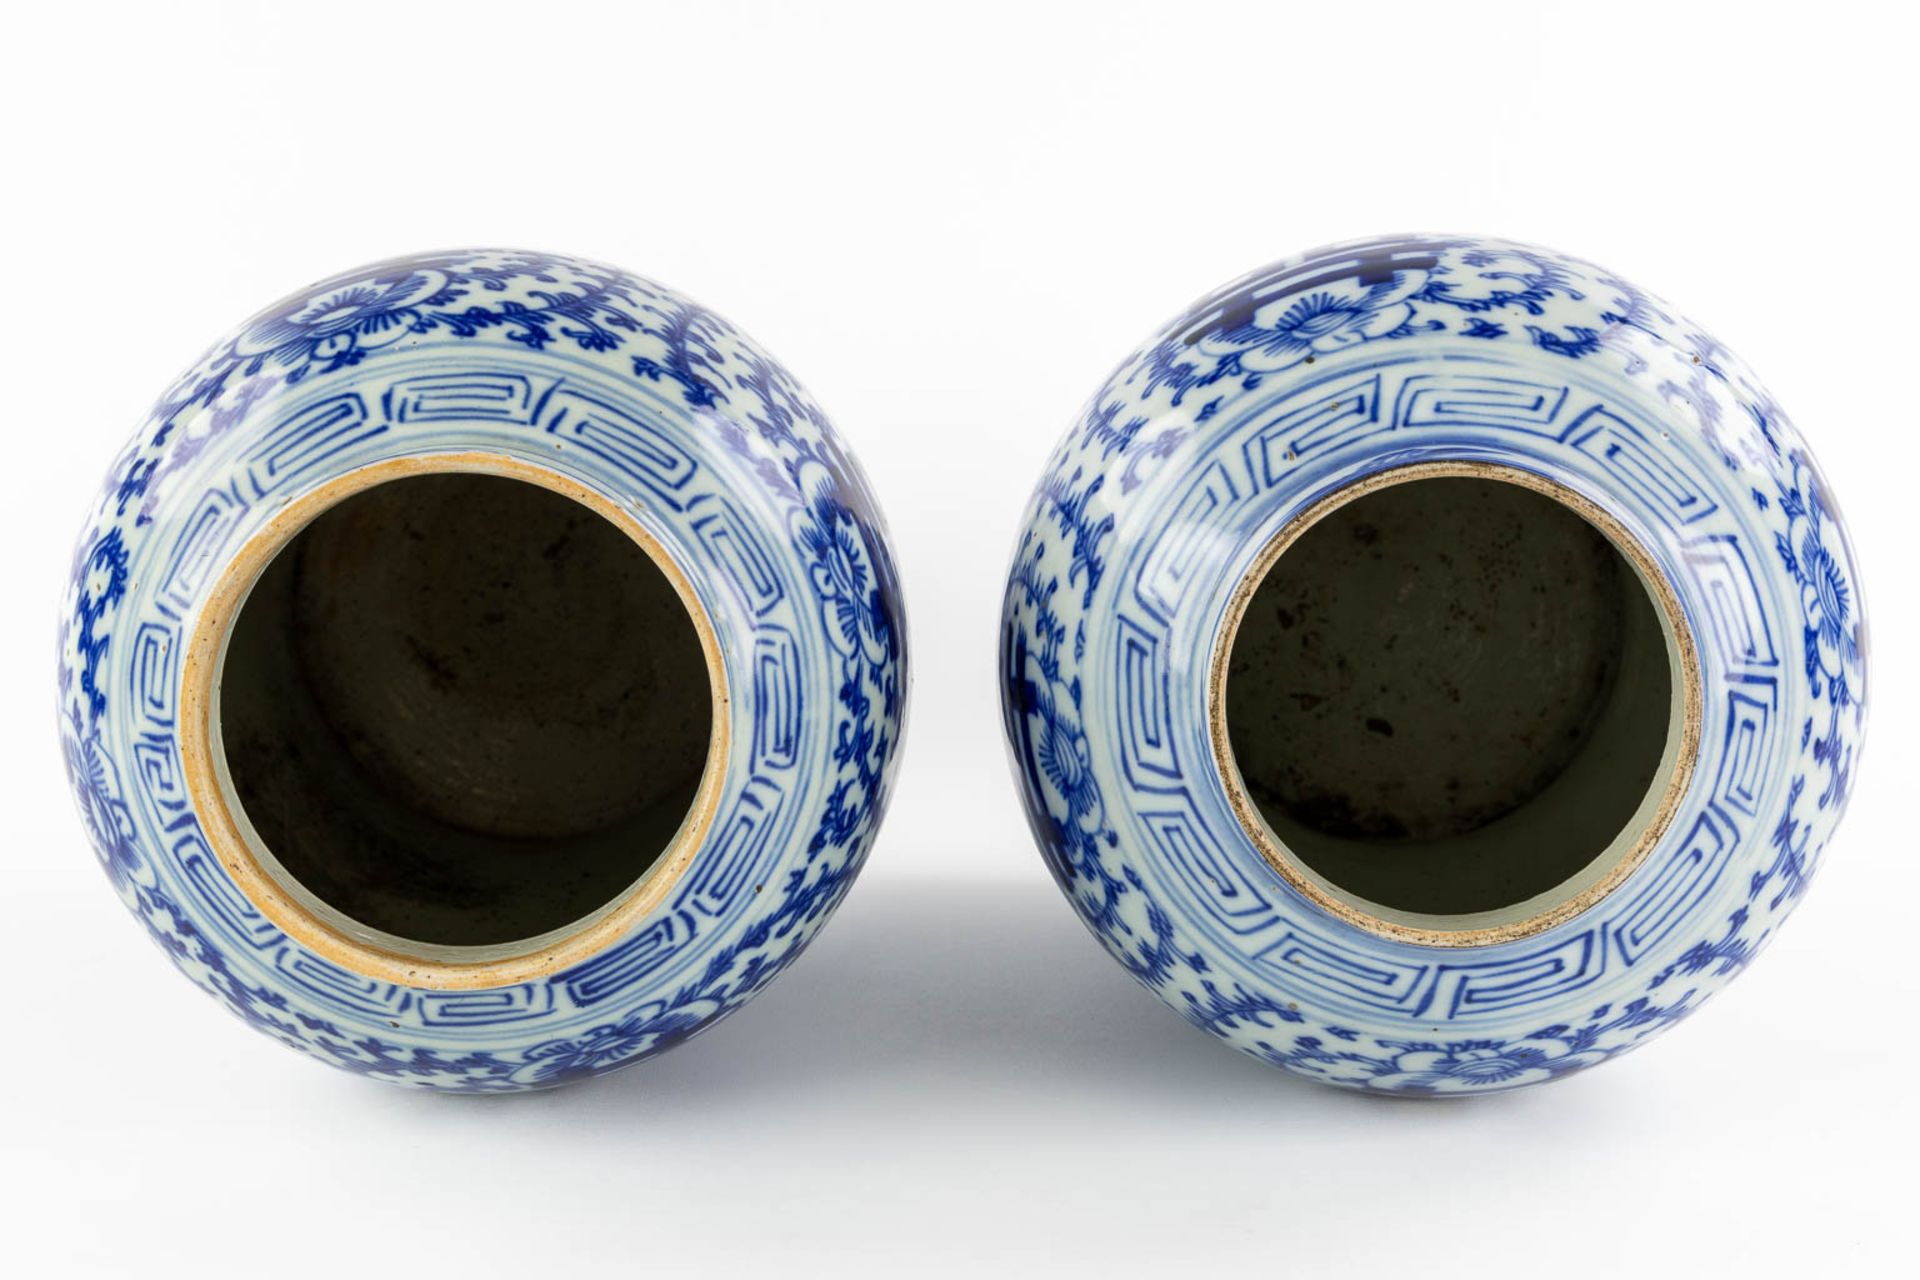 A pair of Chinese vases with a blue-white decor and a Double Xi-sign. 19th/20th C. (H:41 x D:26 cm) - Image 7 of 8